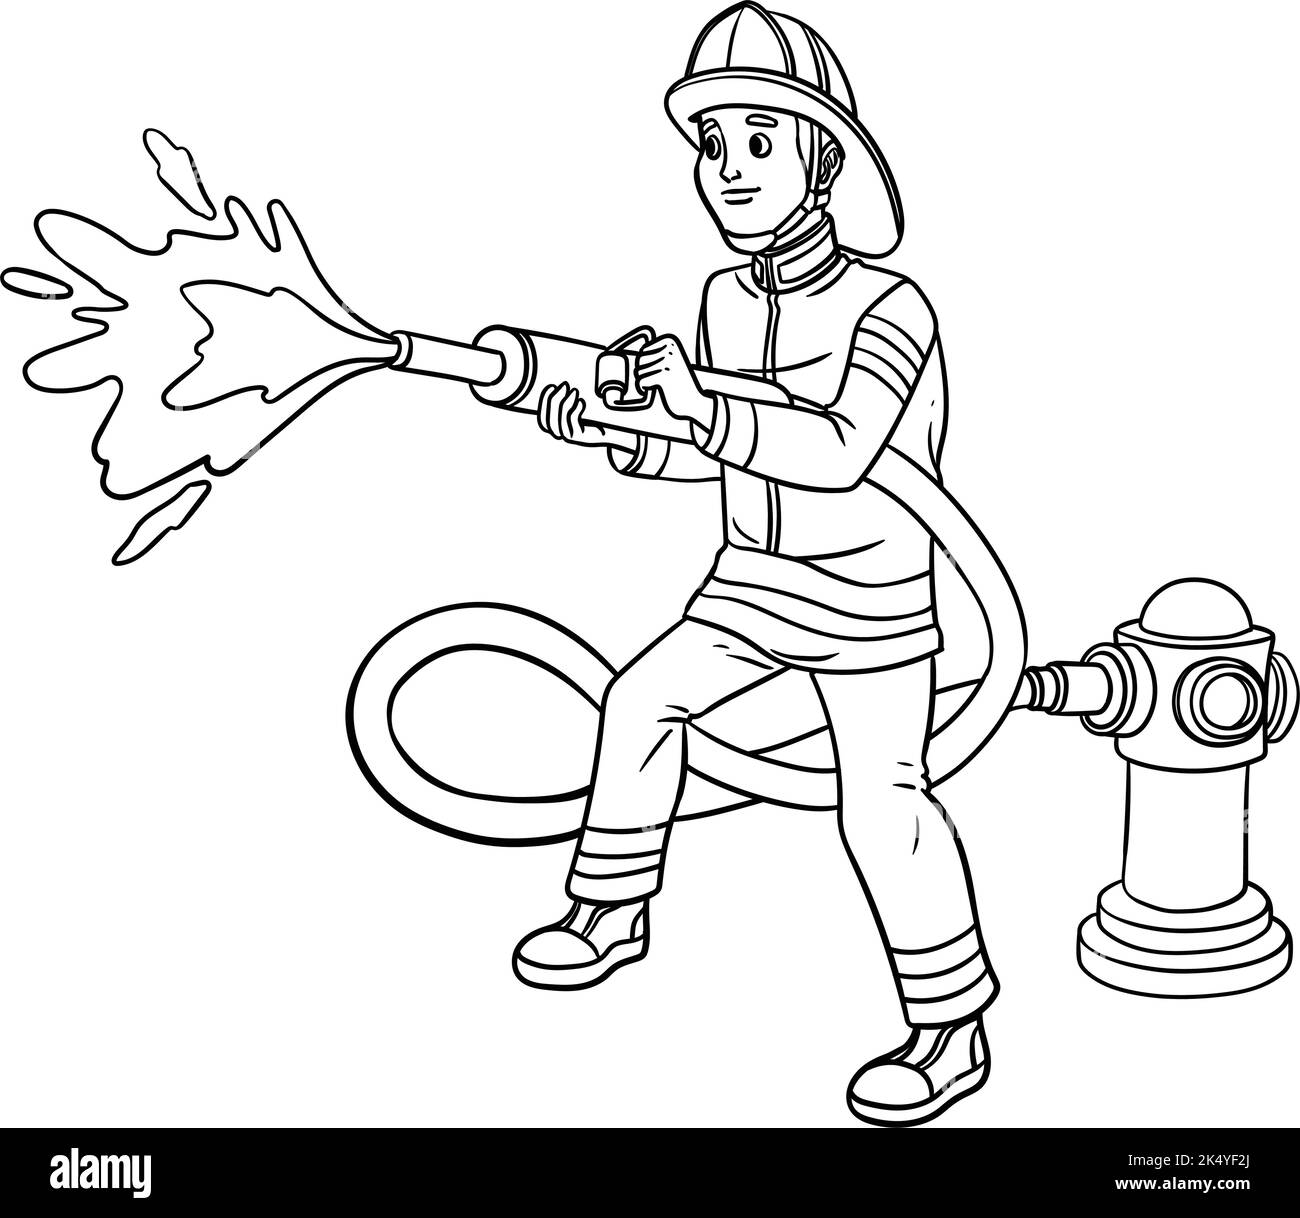 Firefighter Isolated Coloring Page für Kinder Stock Vektor